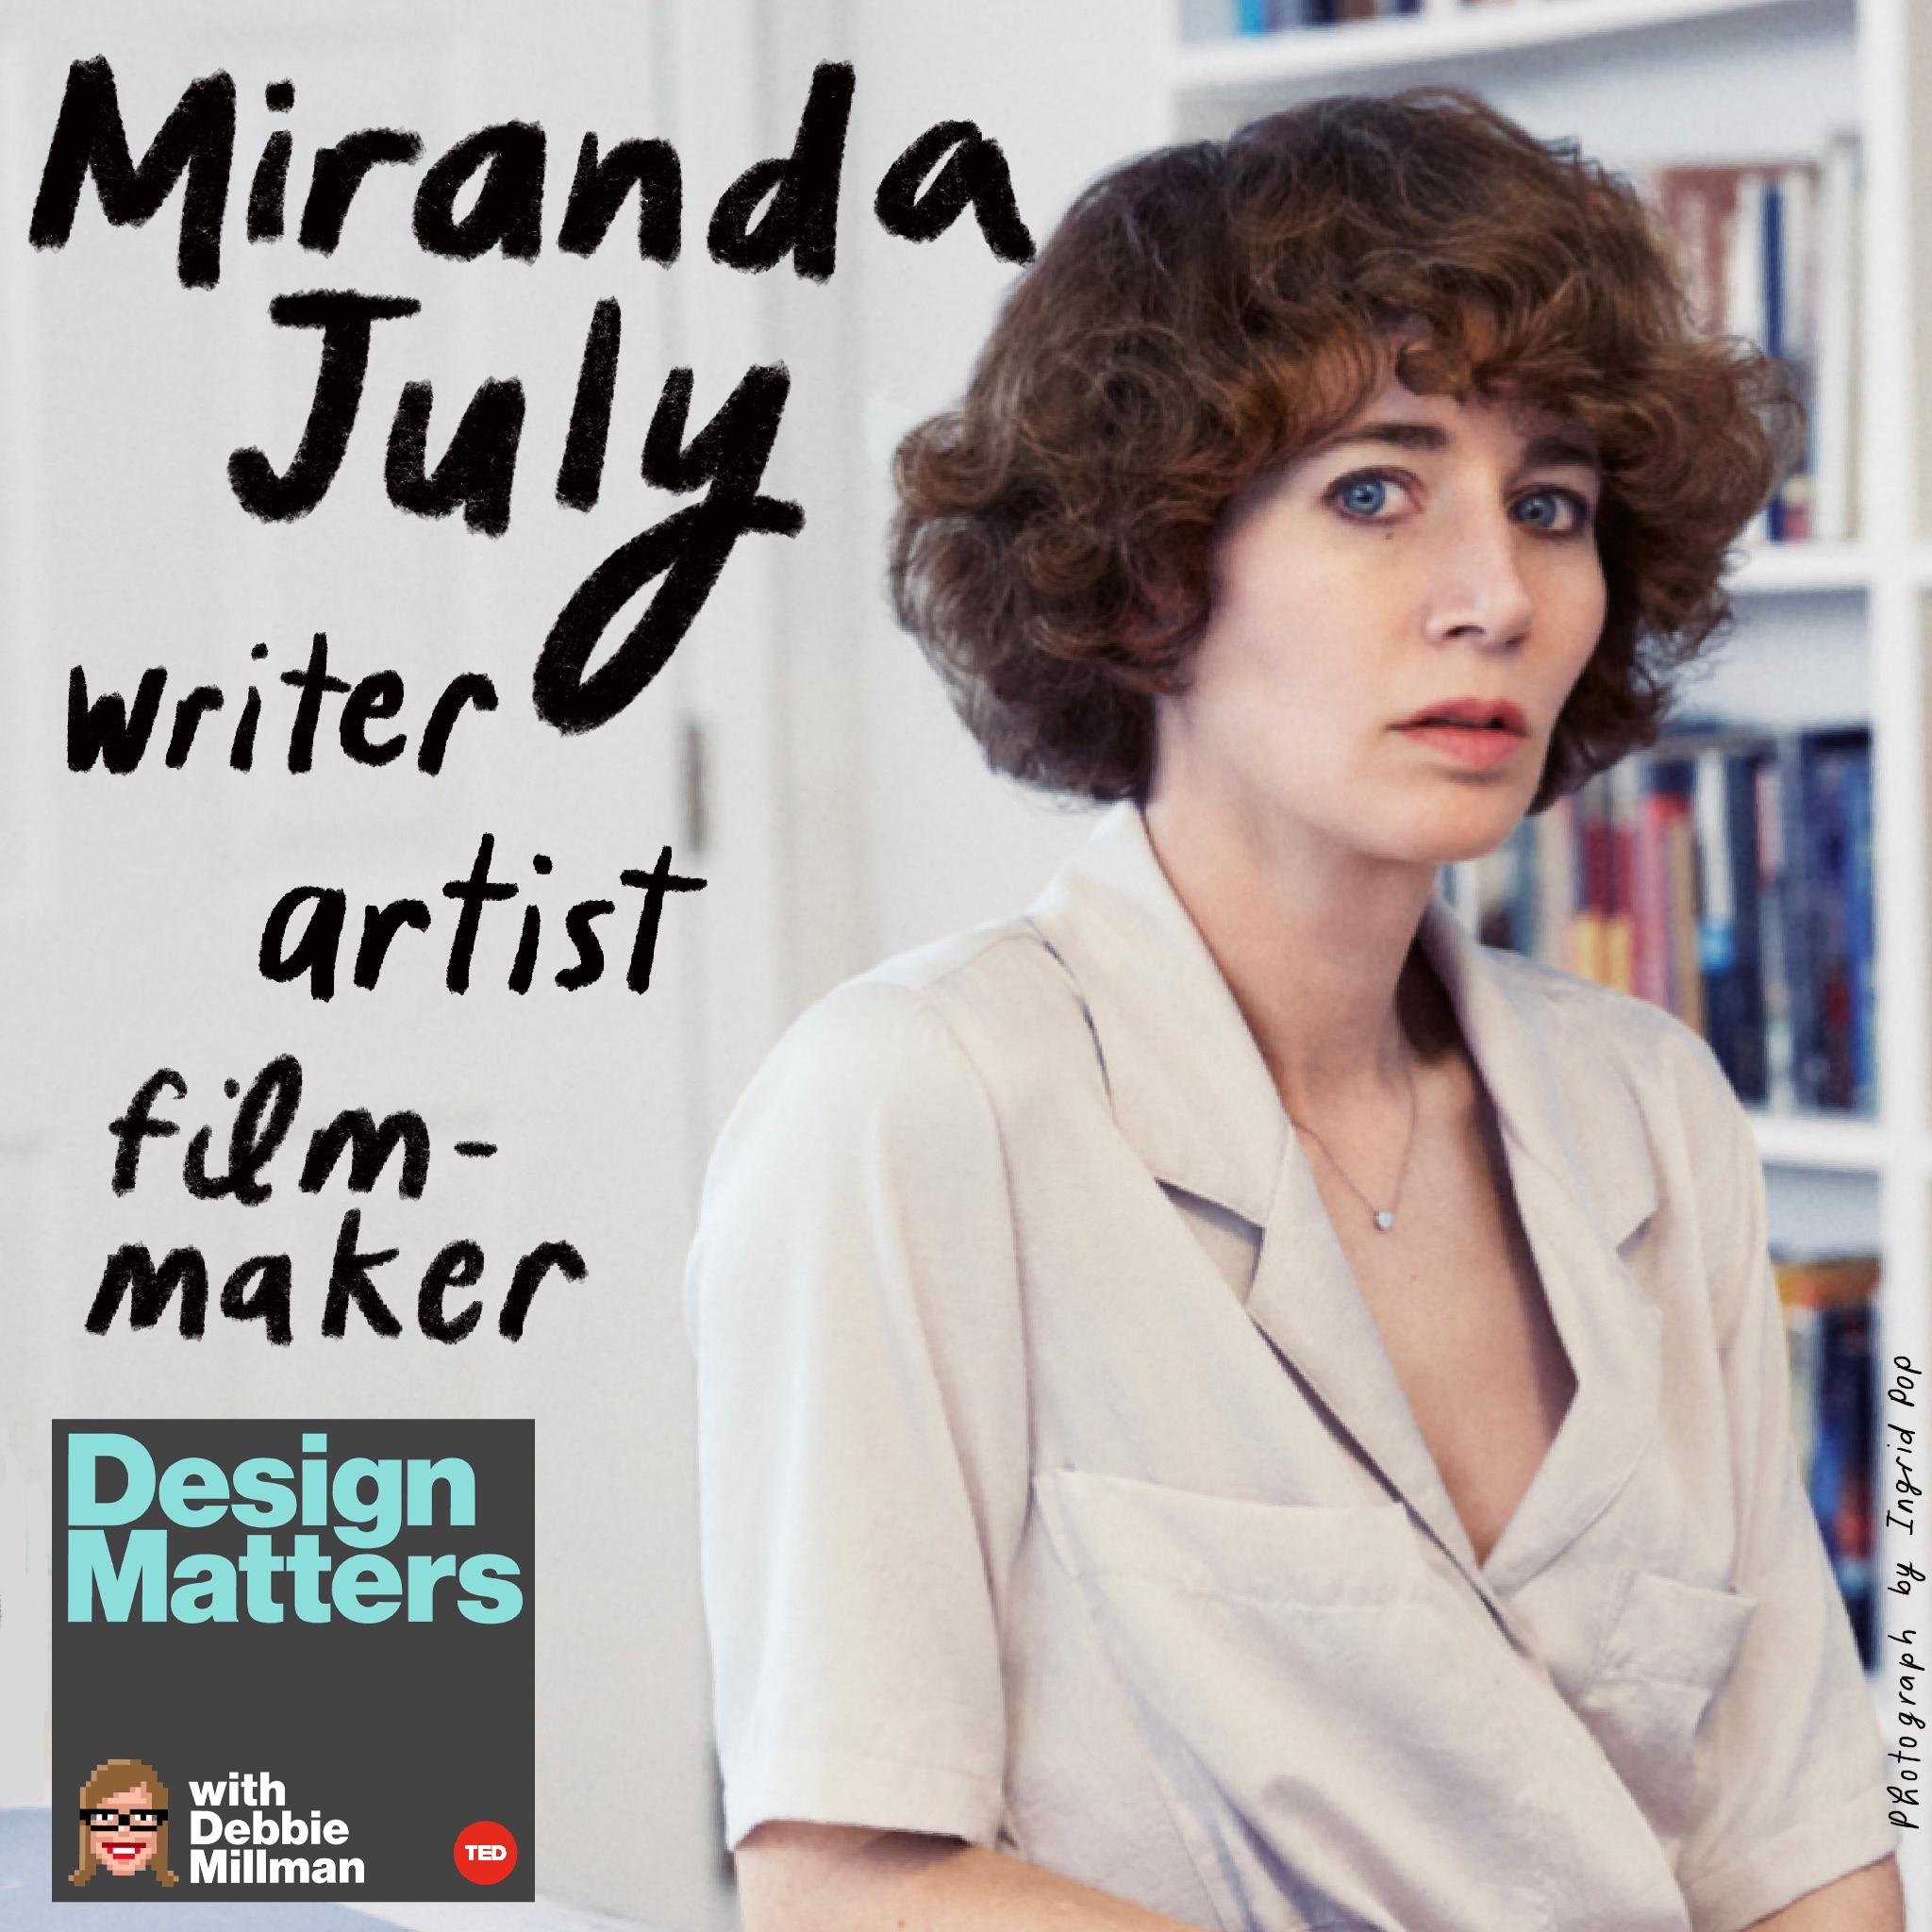 Thumbnail for "Design Matters From the Archive: Miranda July".